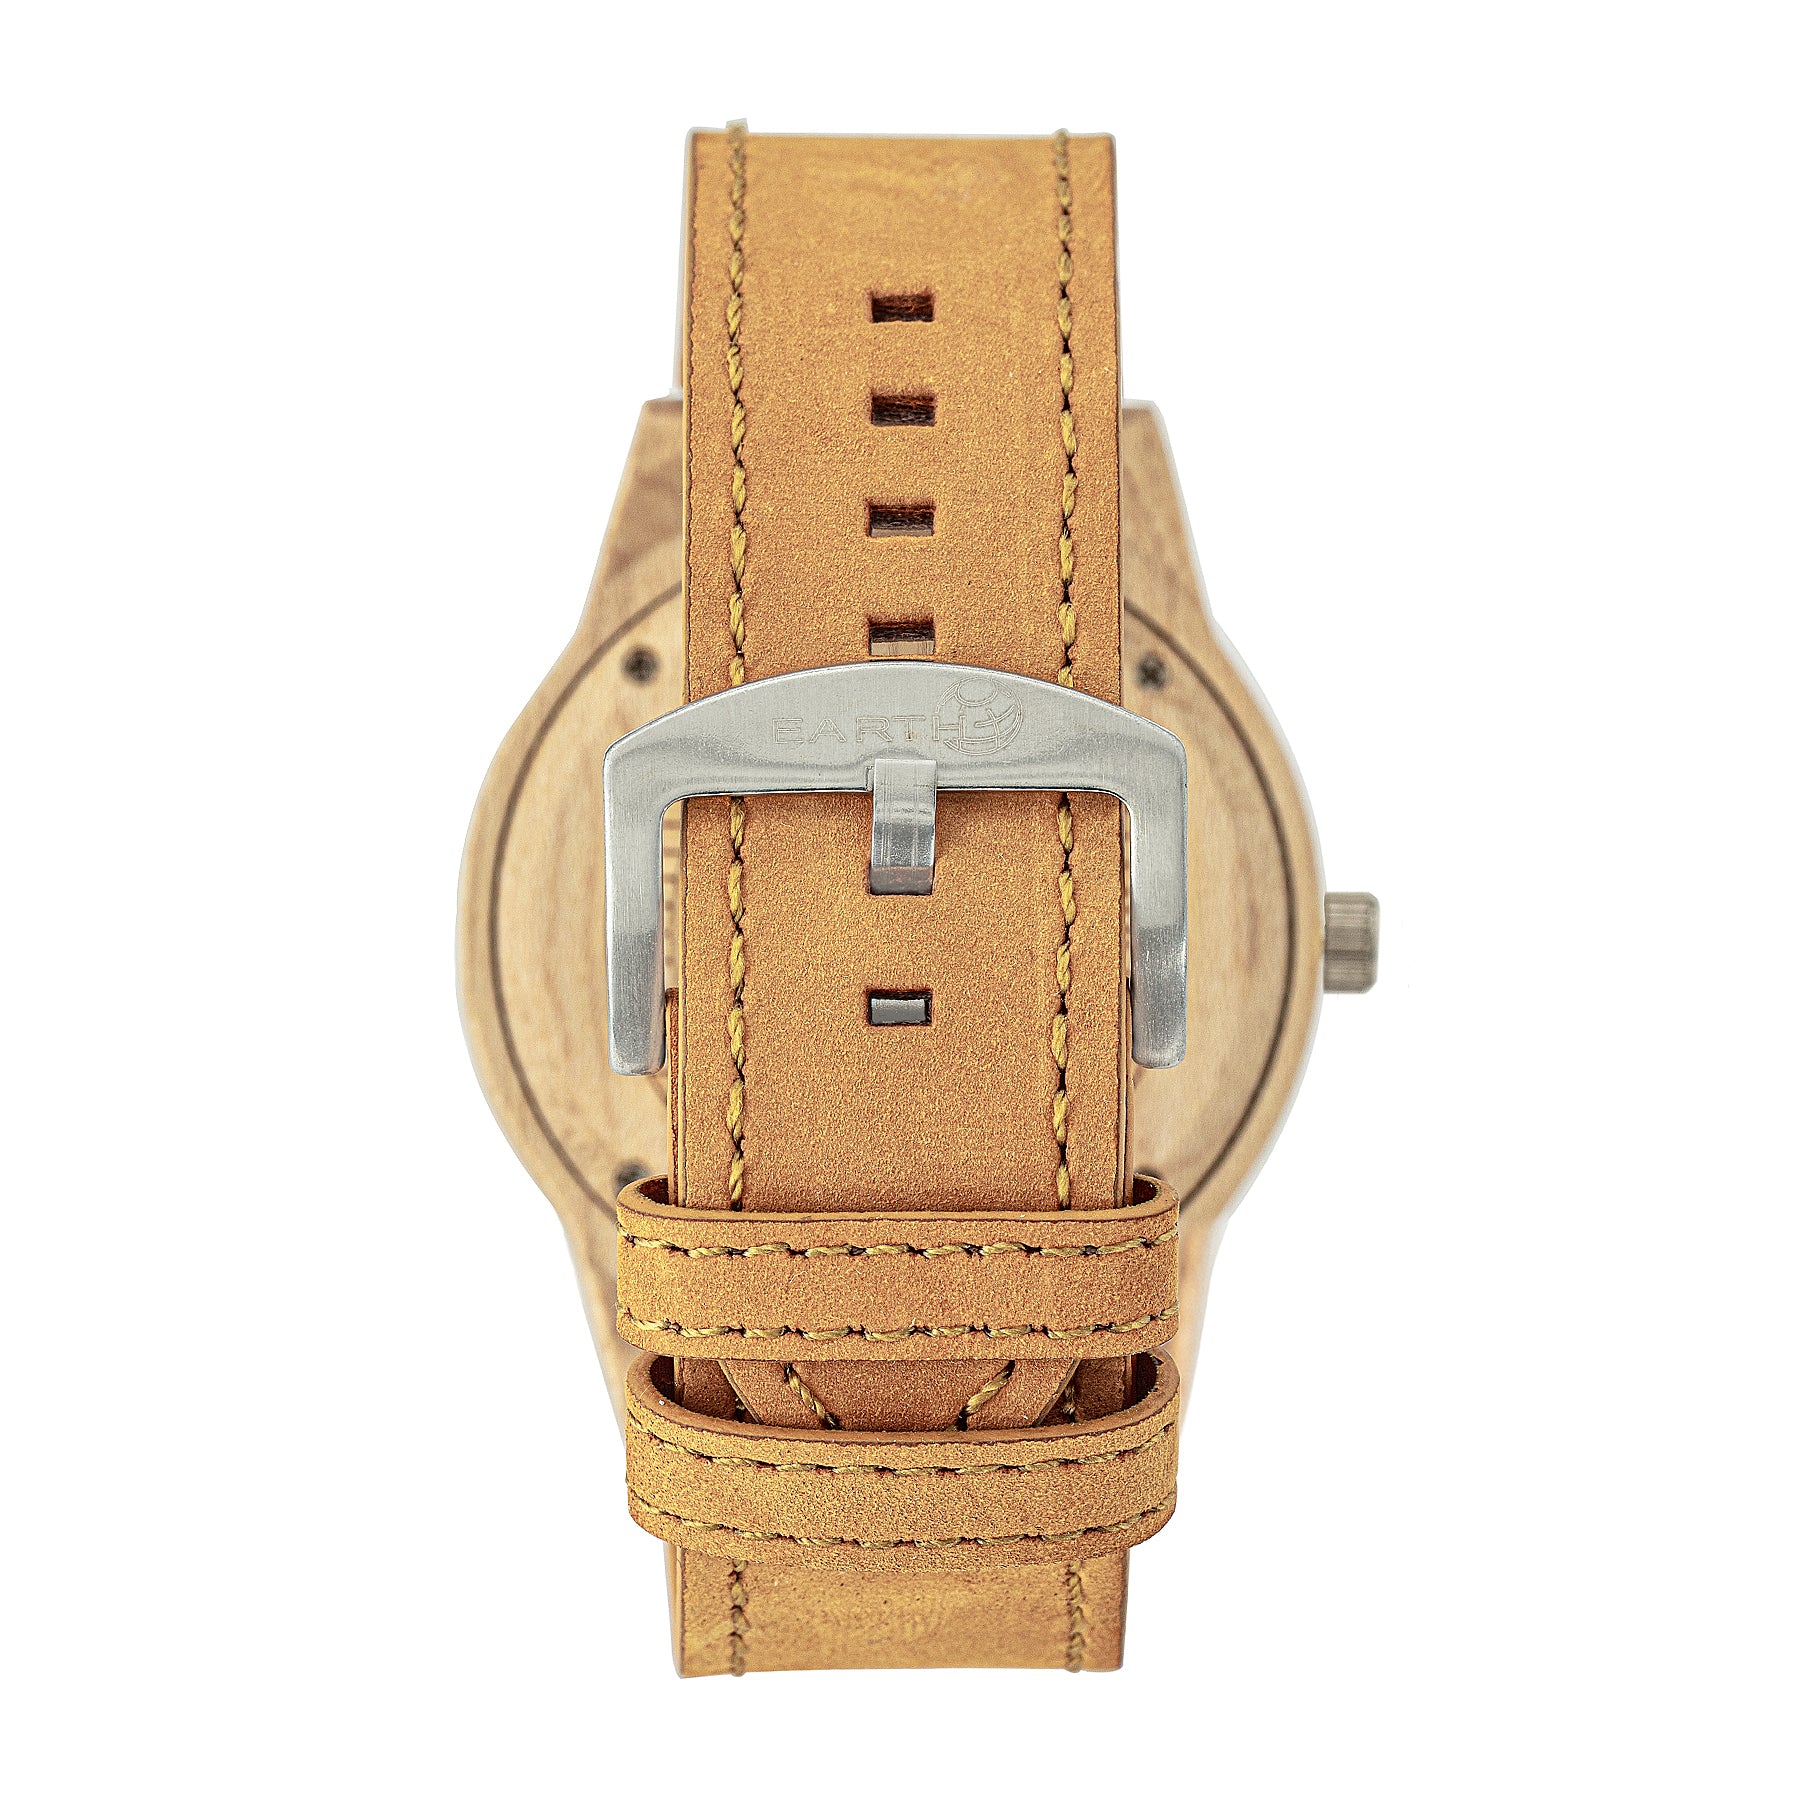 Earth Wood Hyperion Leather-Band Watch w/Day/Date - Khaki/Tan - ETHEW5901